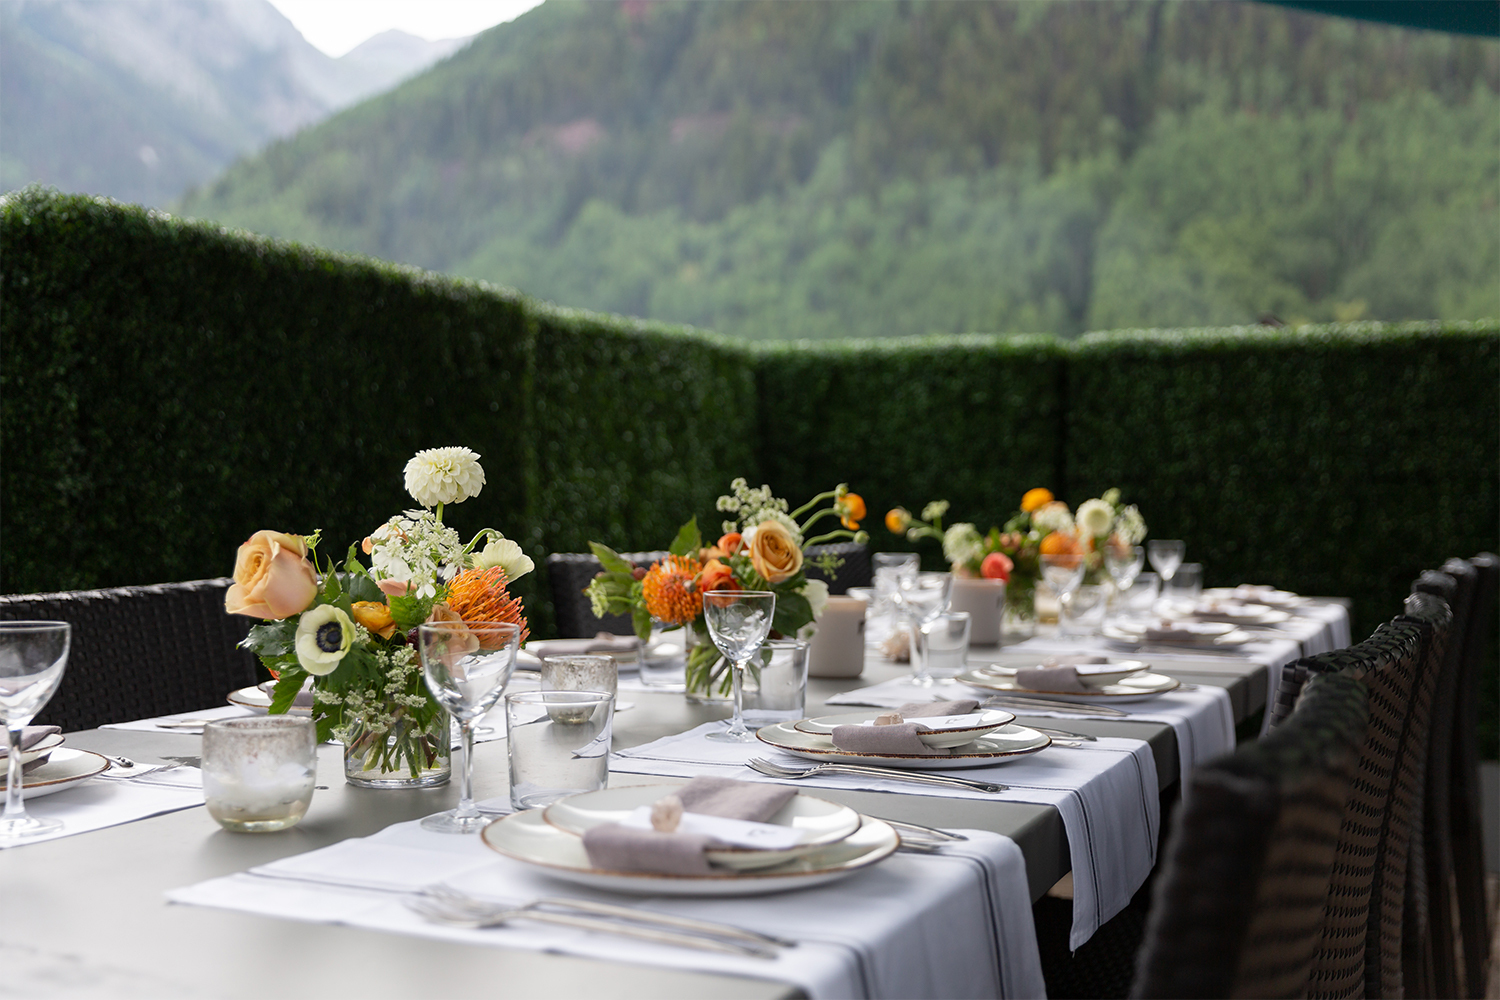 A communal table from meals at Reset, a new luxury trekking retreat in Telluride, Colorado that launched in May 2022